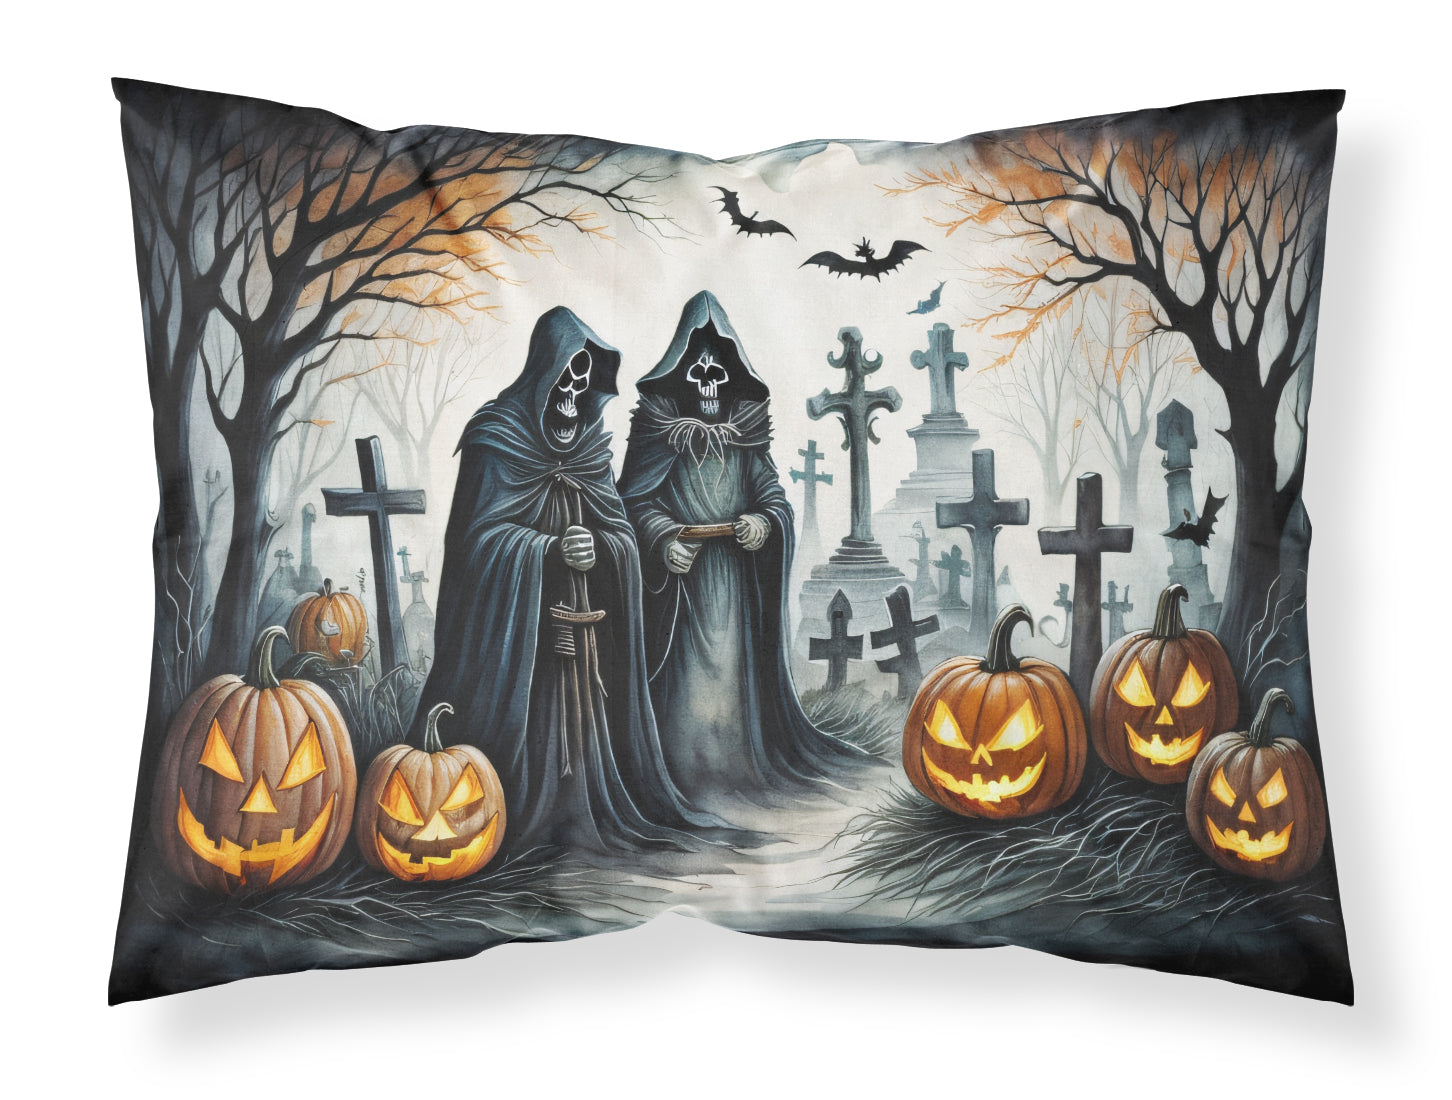 Buy this The Grim Reaper Spooky Halloween Fabric Standard Pillowcase